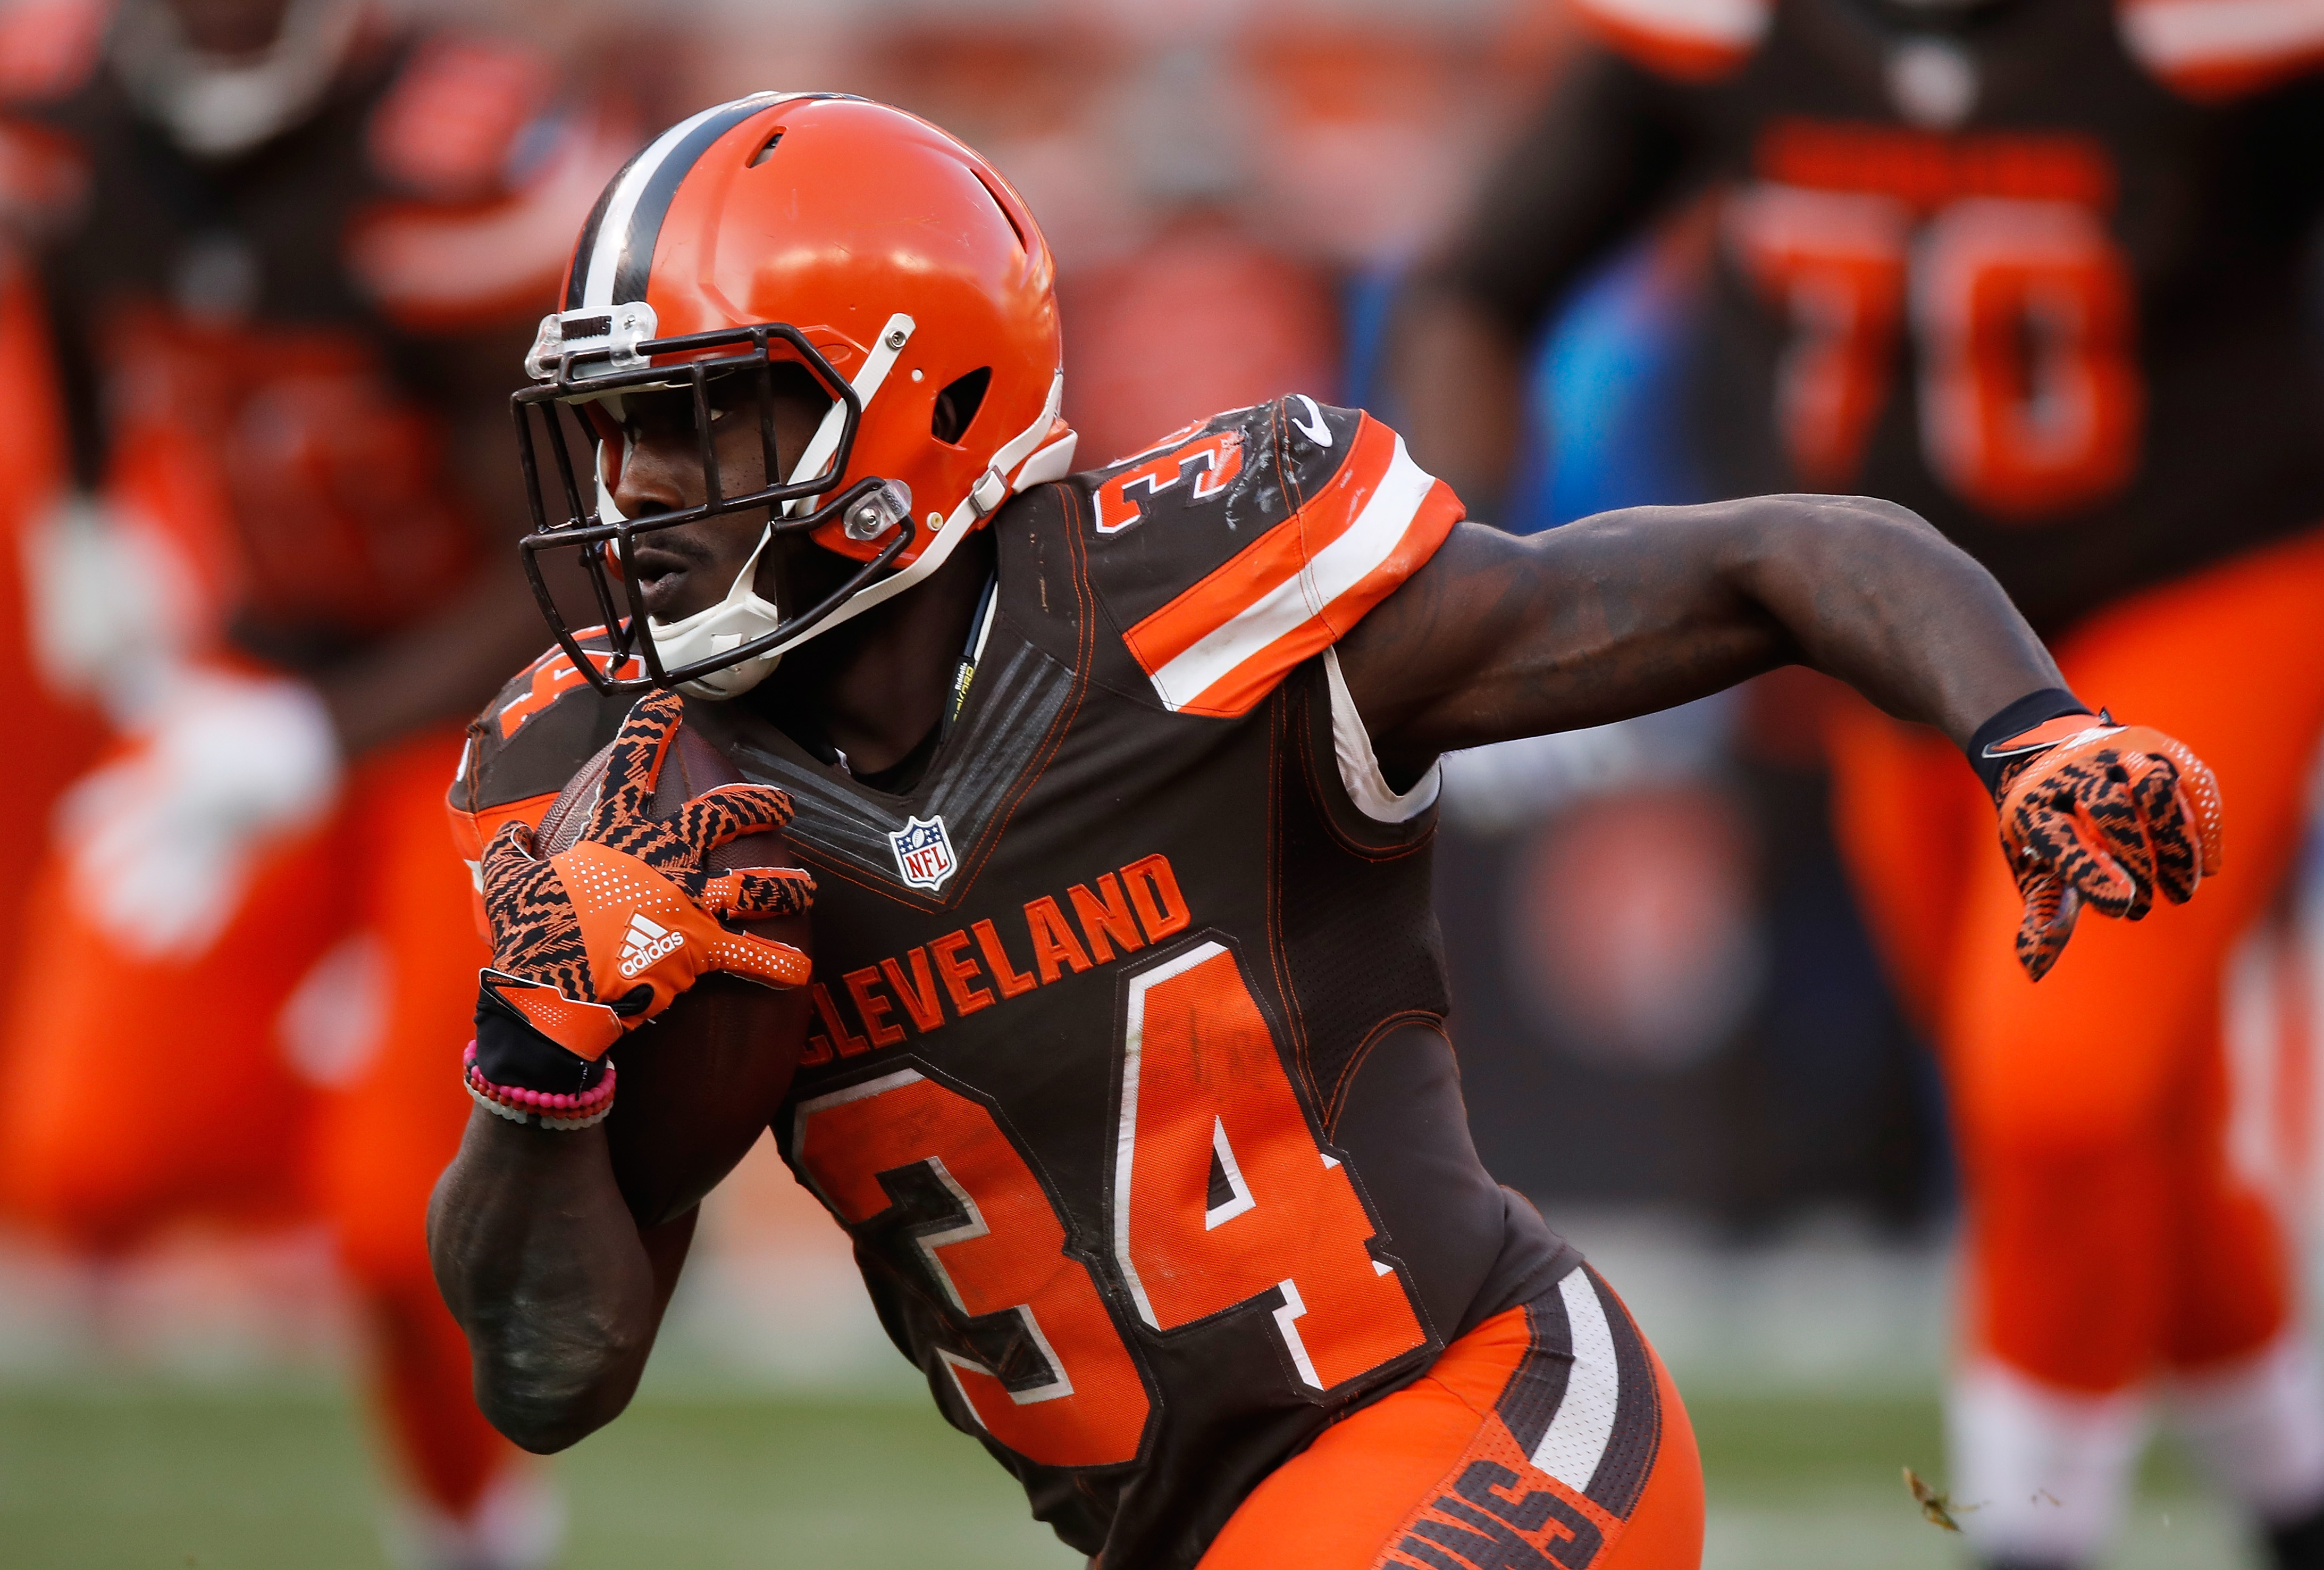 cincinnati bengals vs cleveland browns,  bengals browns point spread, bengals browns odds, bengals browns pick against the spread, over under, bengals browns prediction, latest, vegas line, bengals browns favored, today, point total